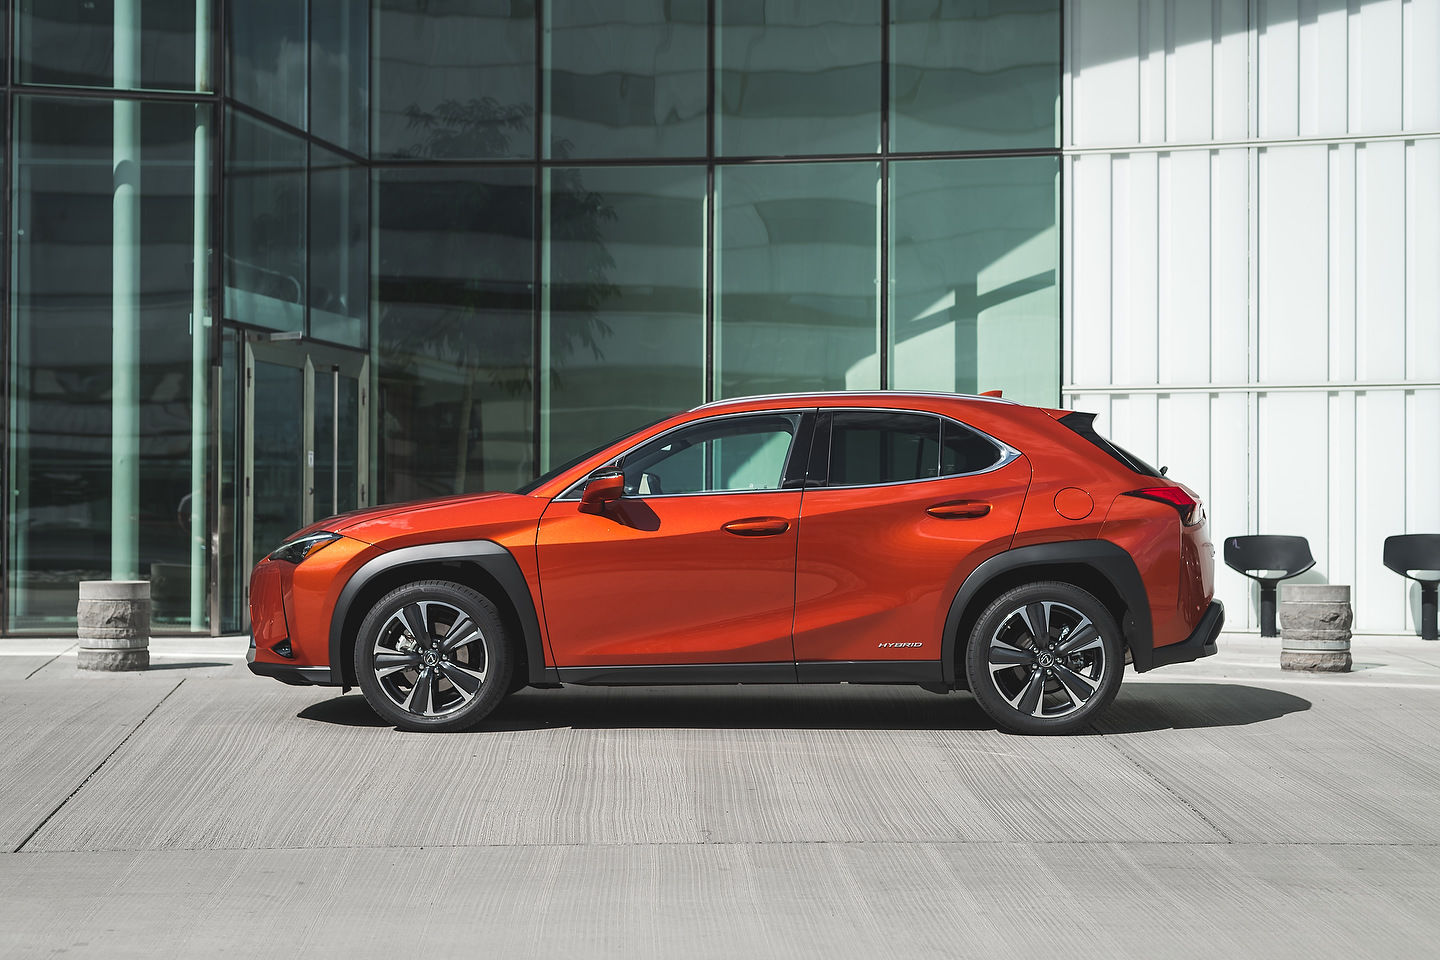 A look at the 2019 Lexus UX reviews